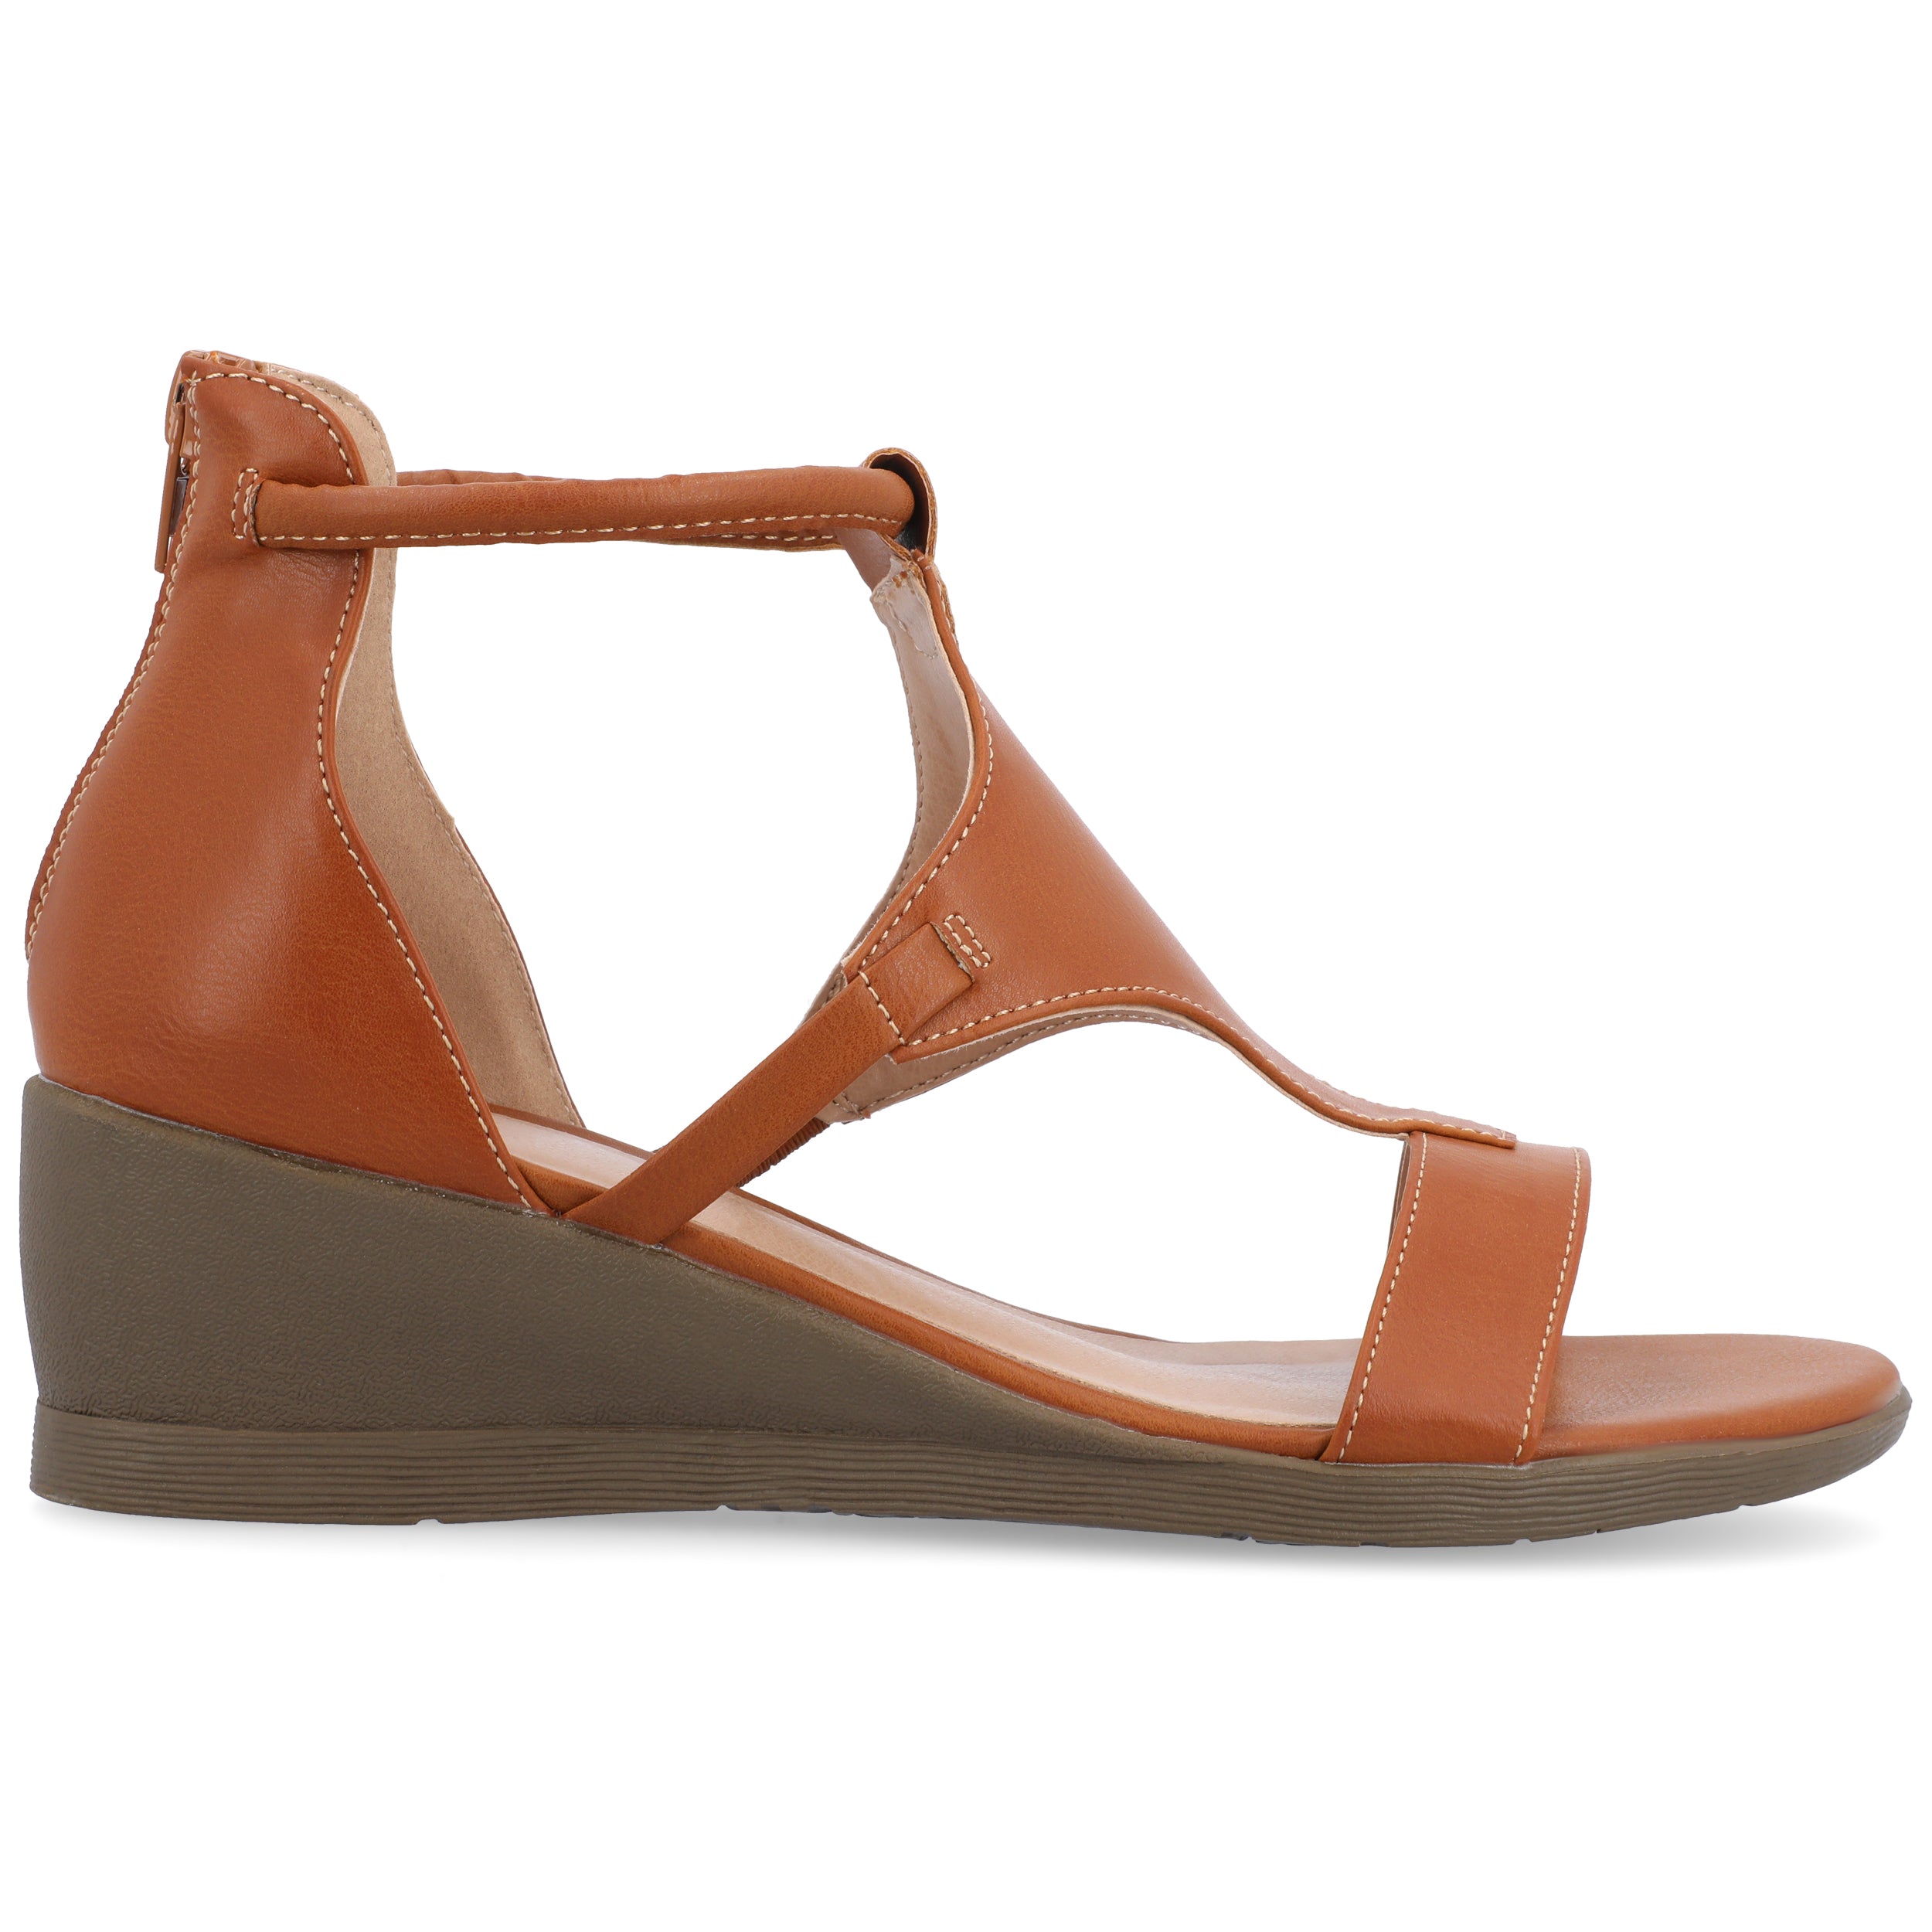 B.O.C. by Born Summer | Womens Wedge Sandals | Rogan's Shoes